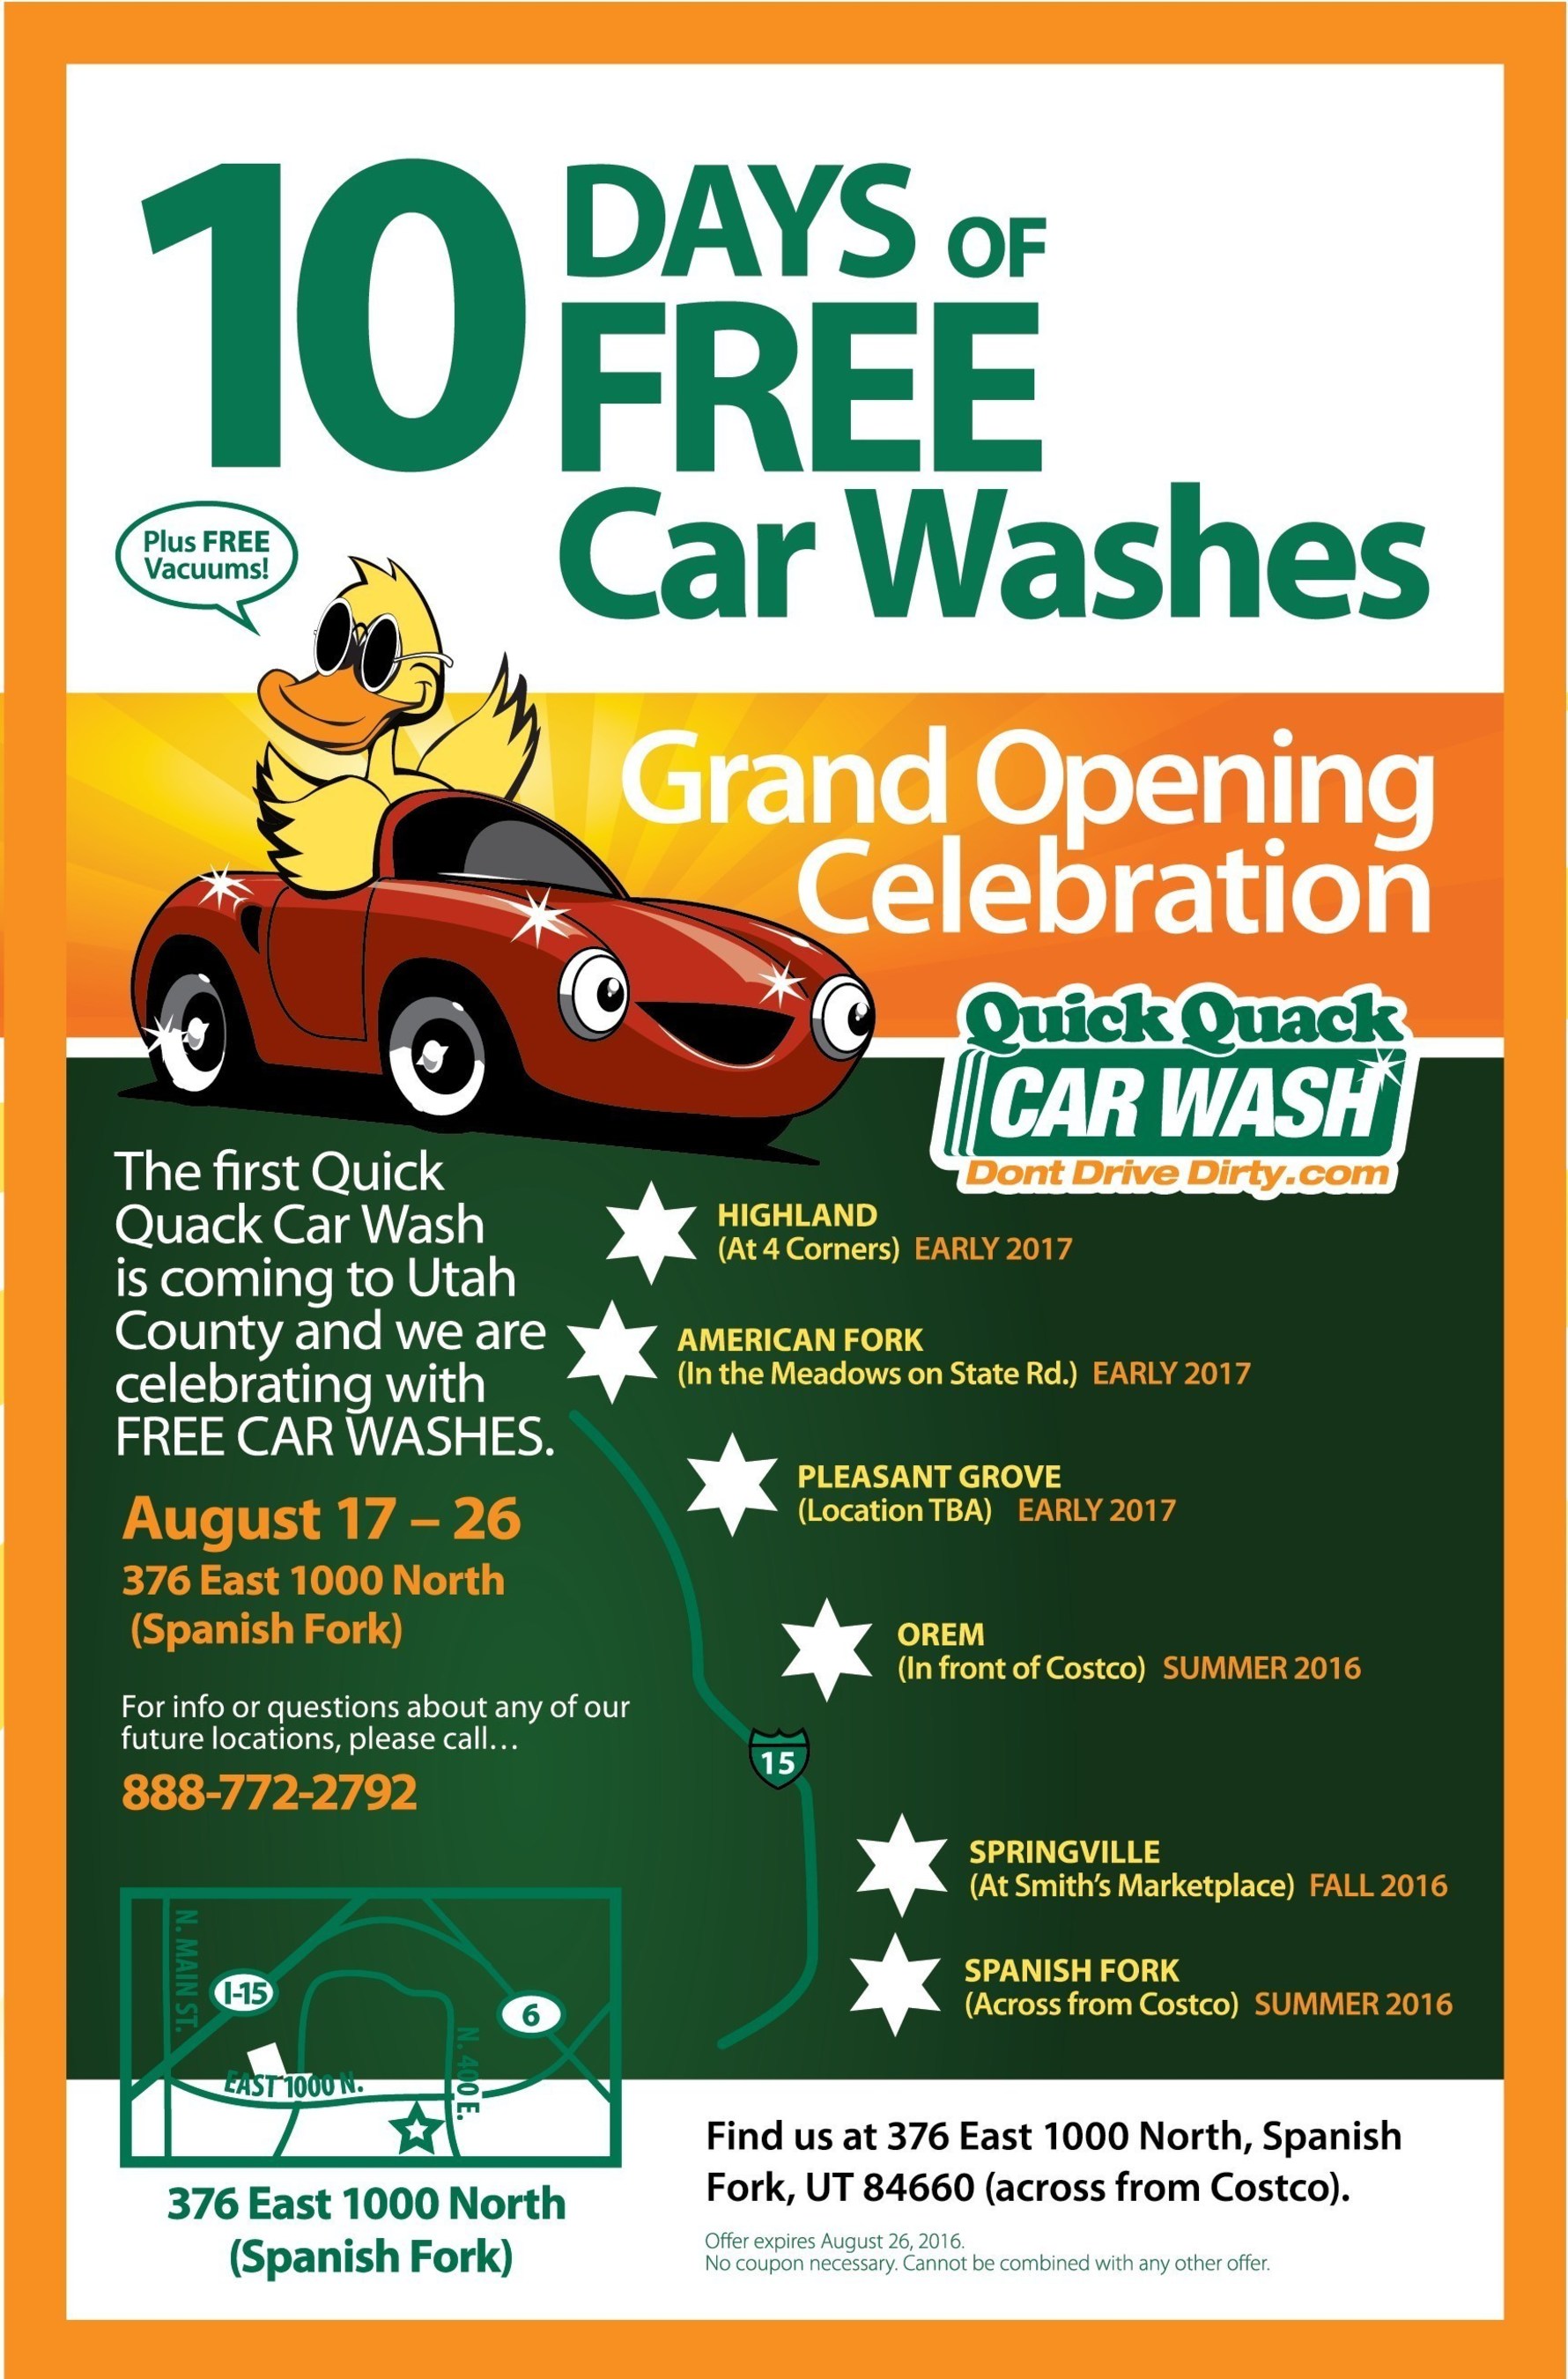 10 Days of Free Car Washes at New Quick Quack Car Wash in Spanish Fork. More Locations Coming Soon!